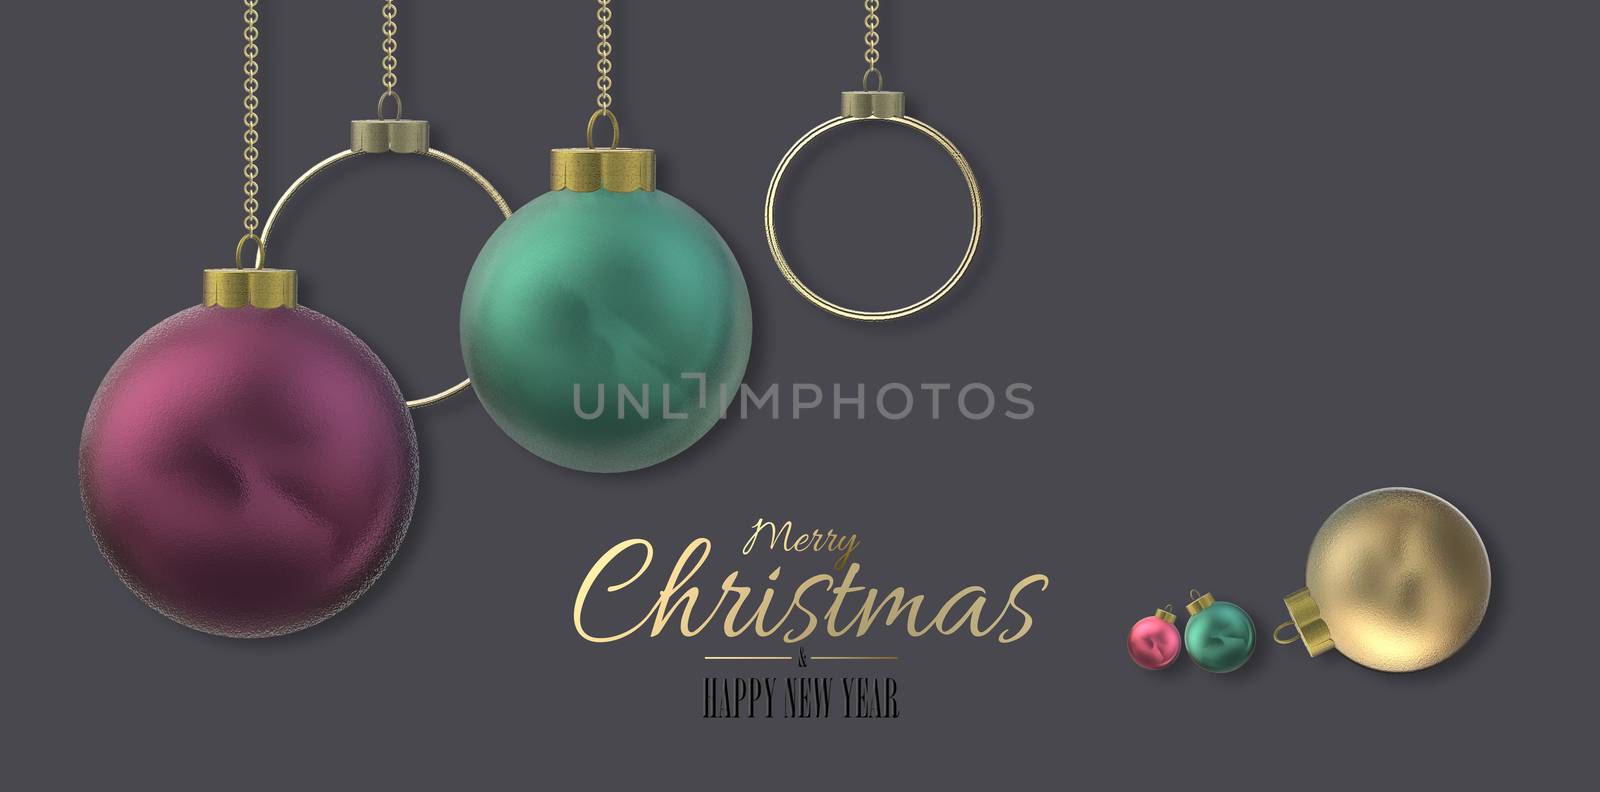 Christmas banner with 3D realistic Xmas balls on dark pastel background. Golden text Merry Christmas Happy New Year. 3D illustration. Horizontal holiday design